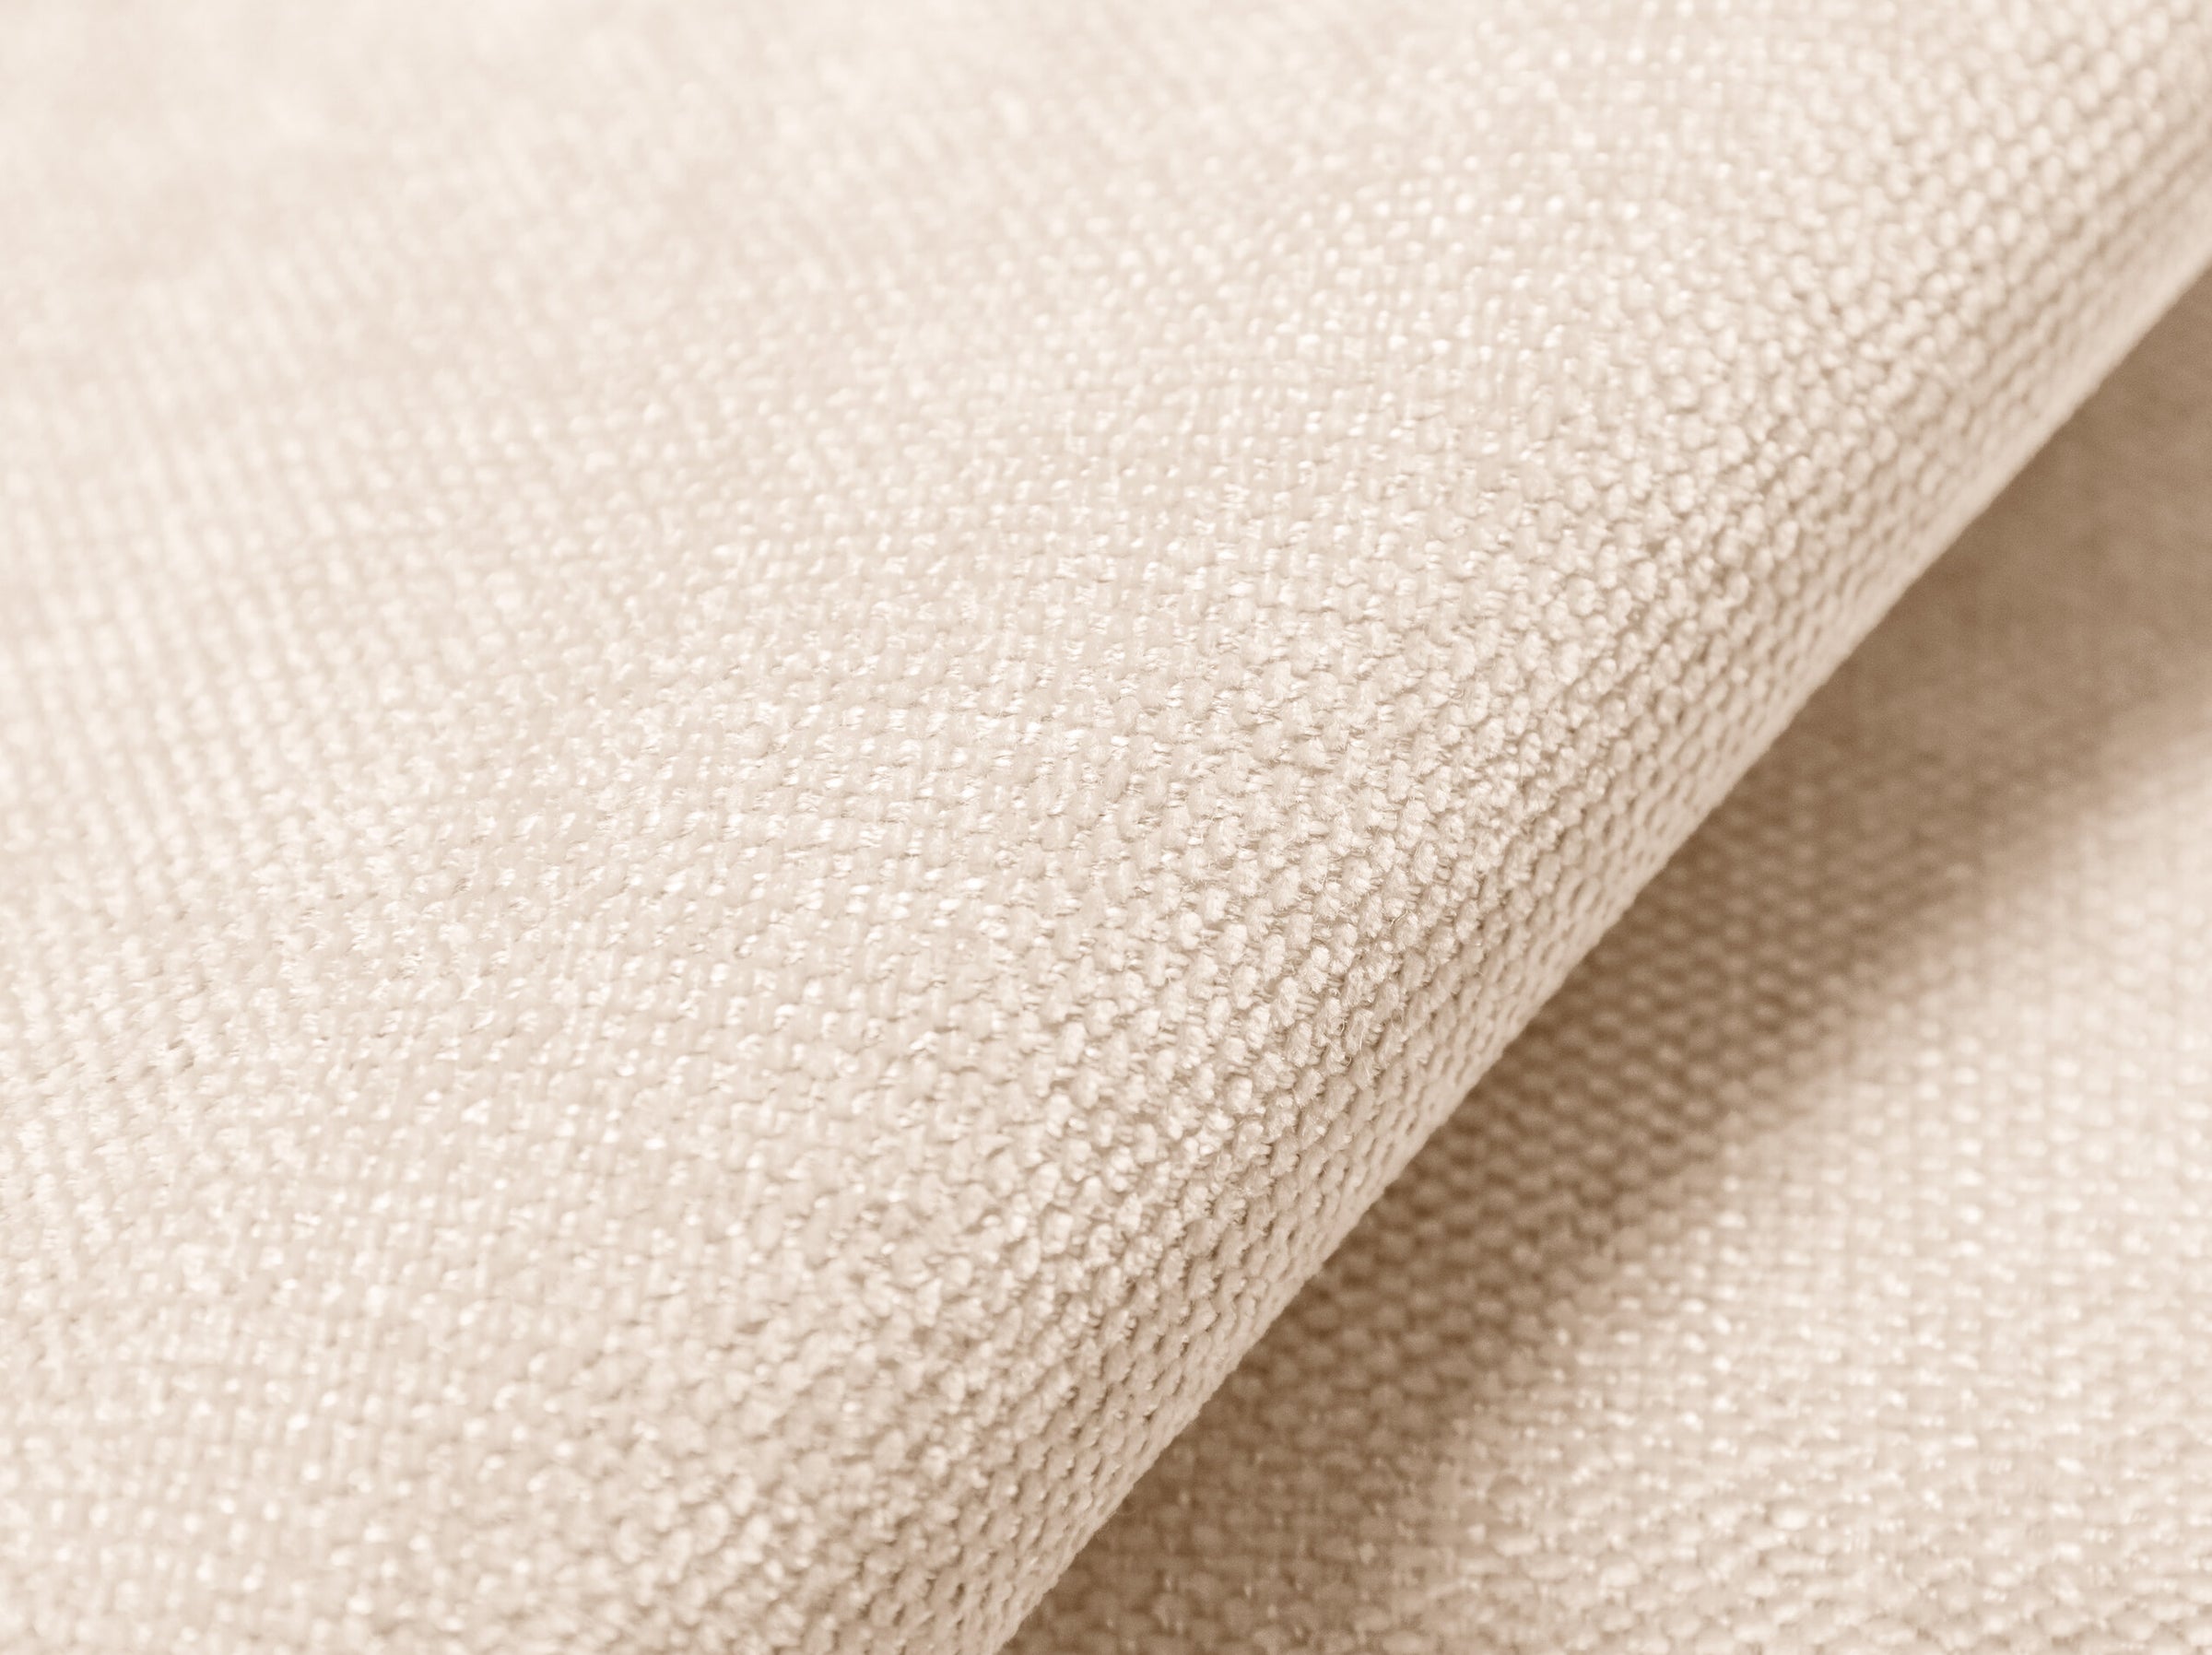 Agawa Structured fabric (Ros451) / Light beige 5